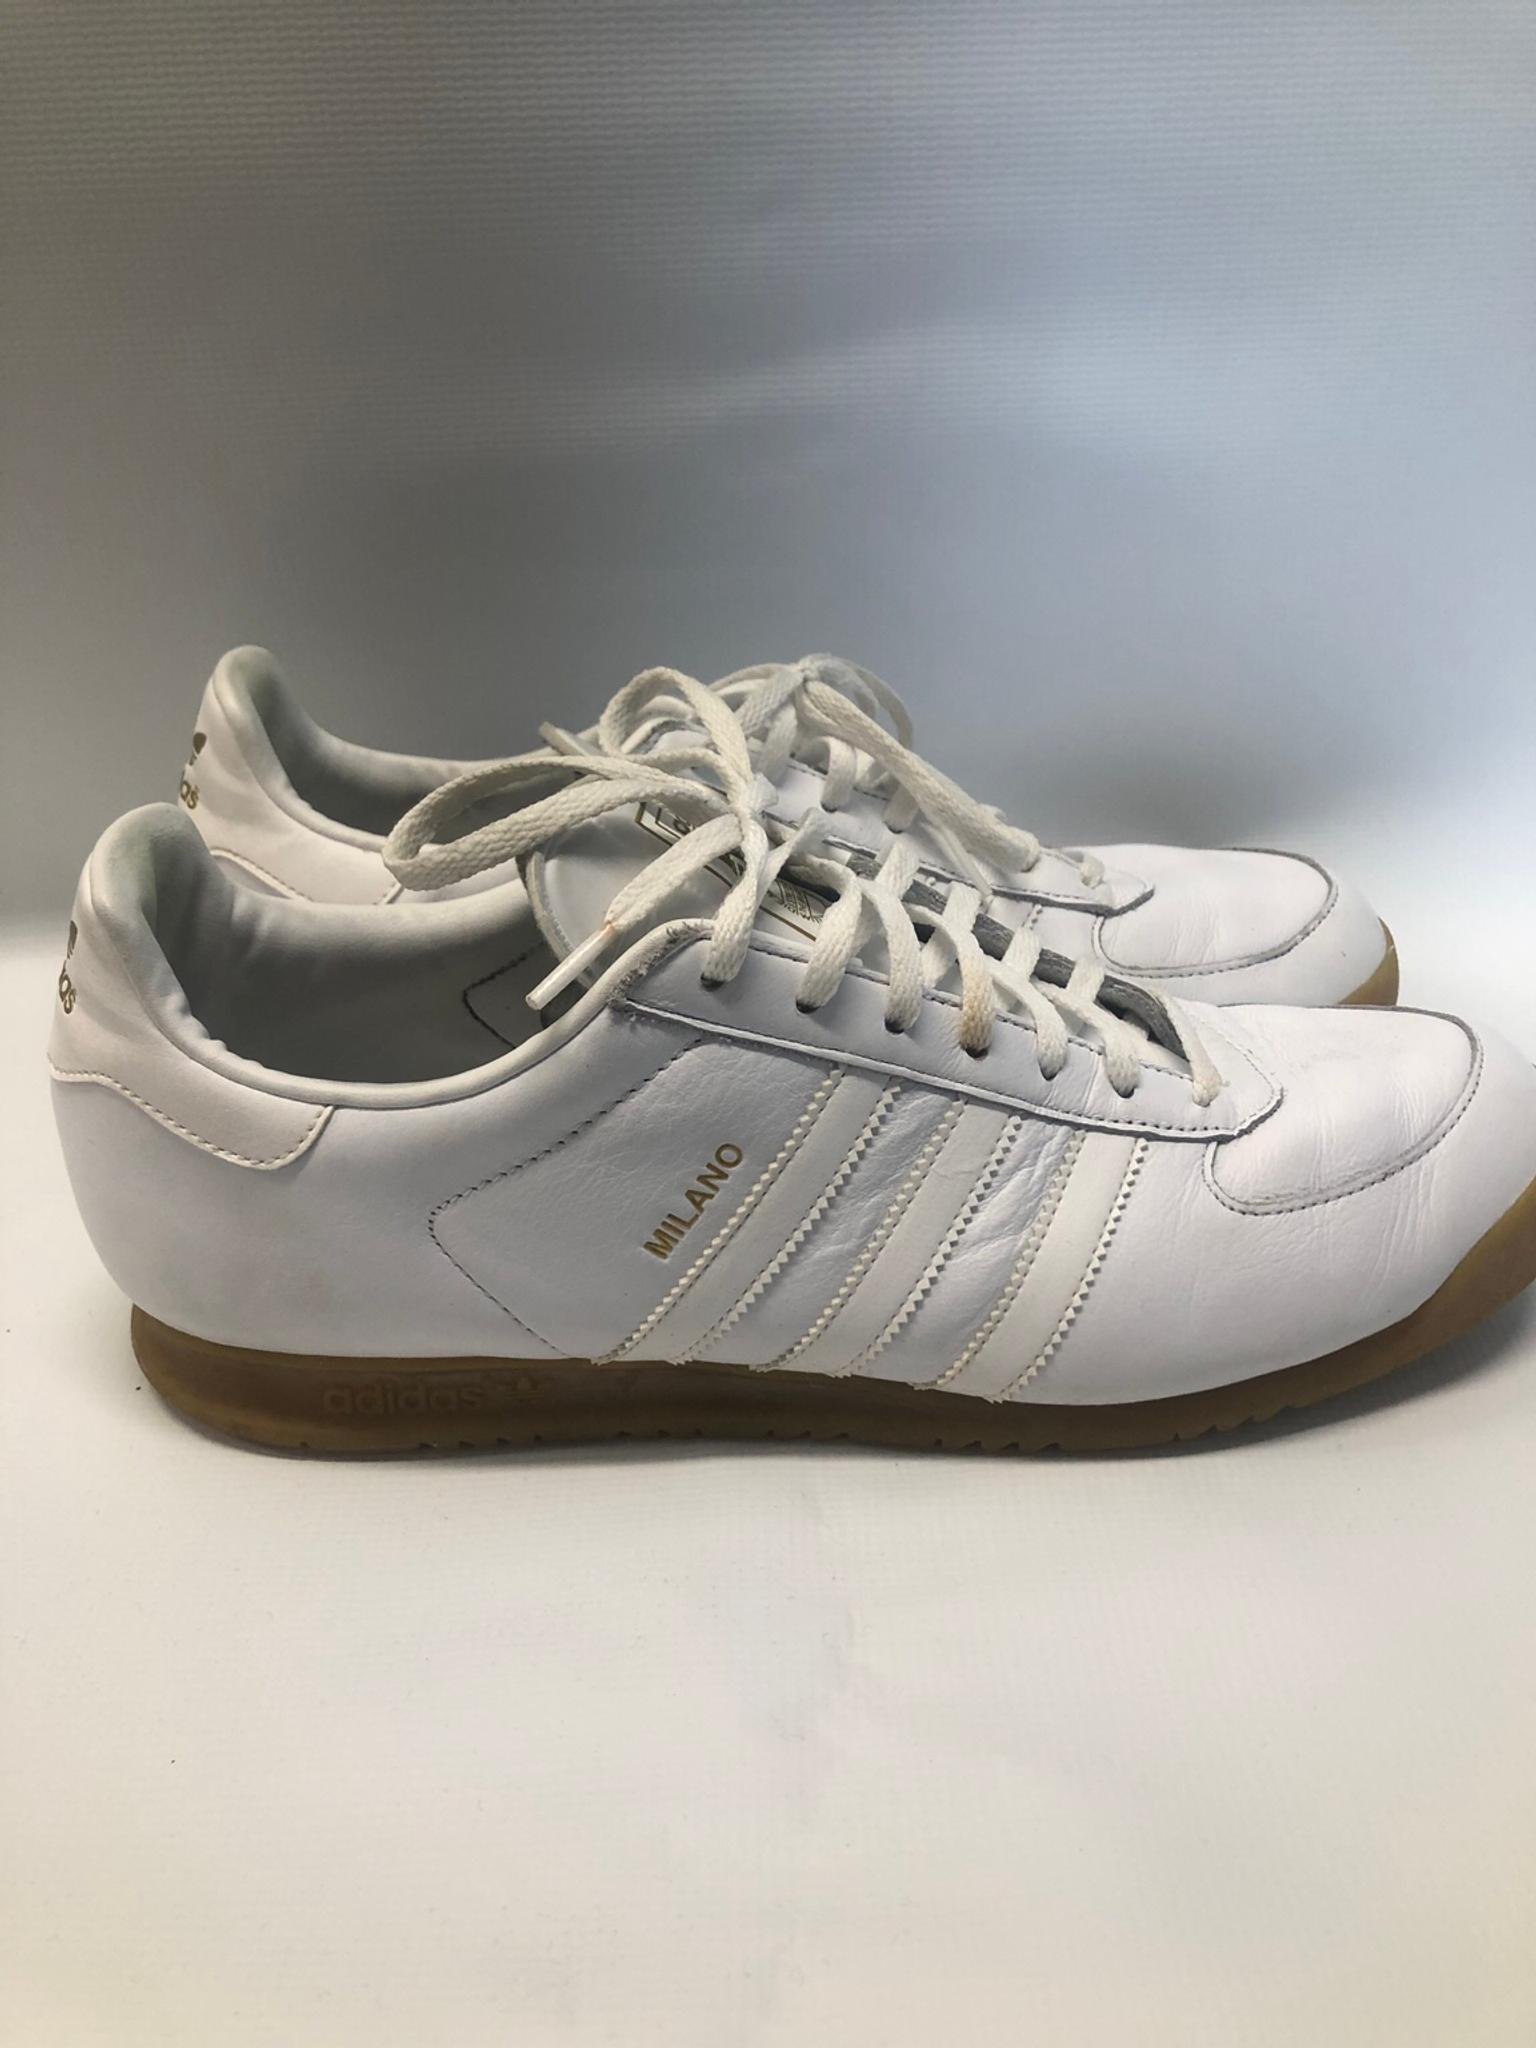 adidas milano trainers size